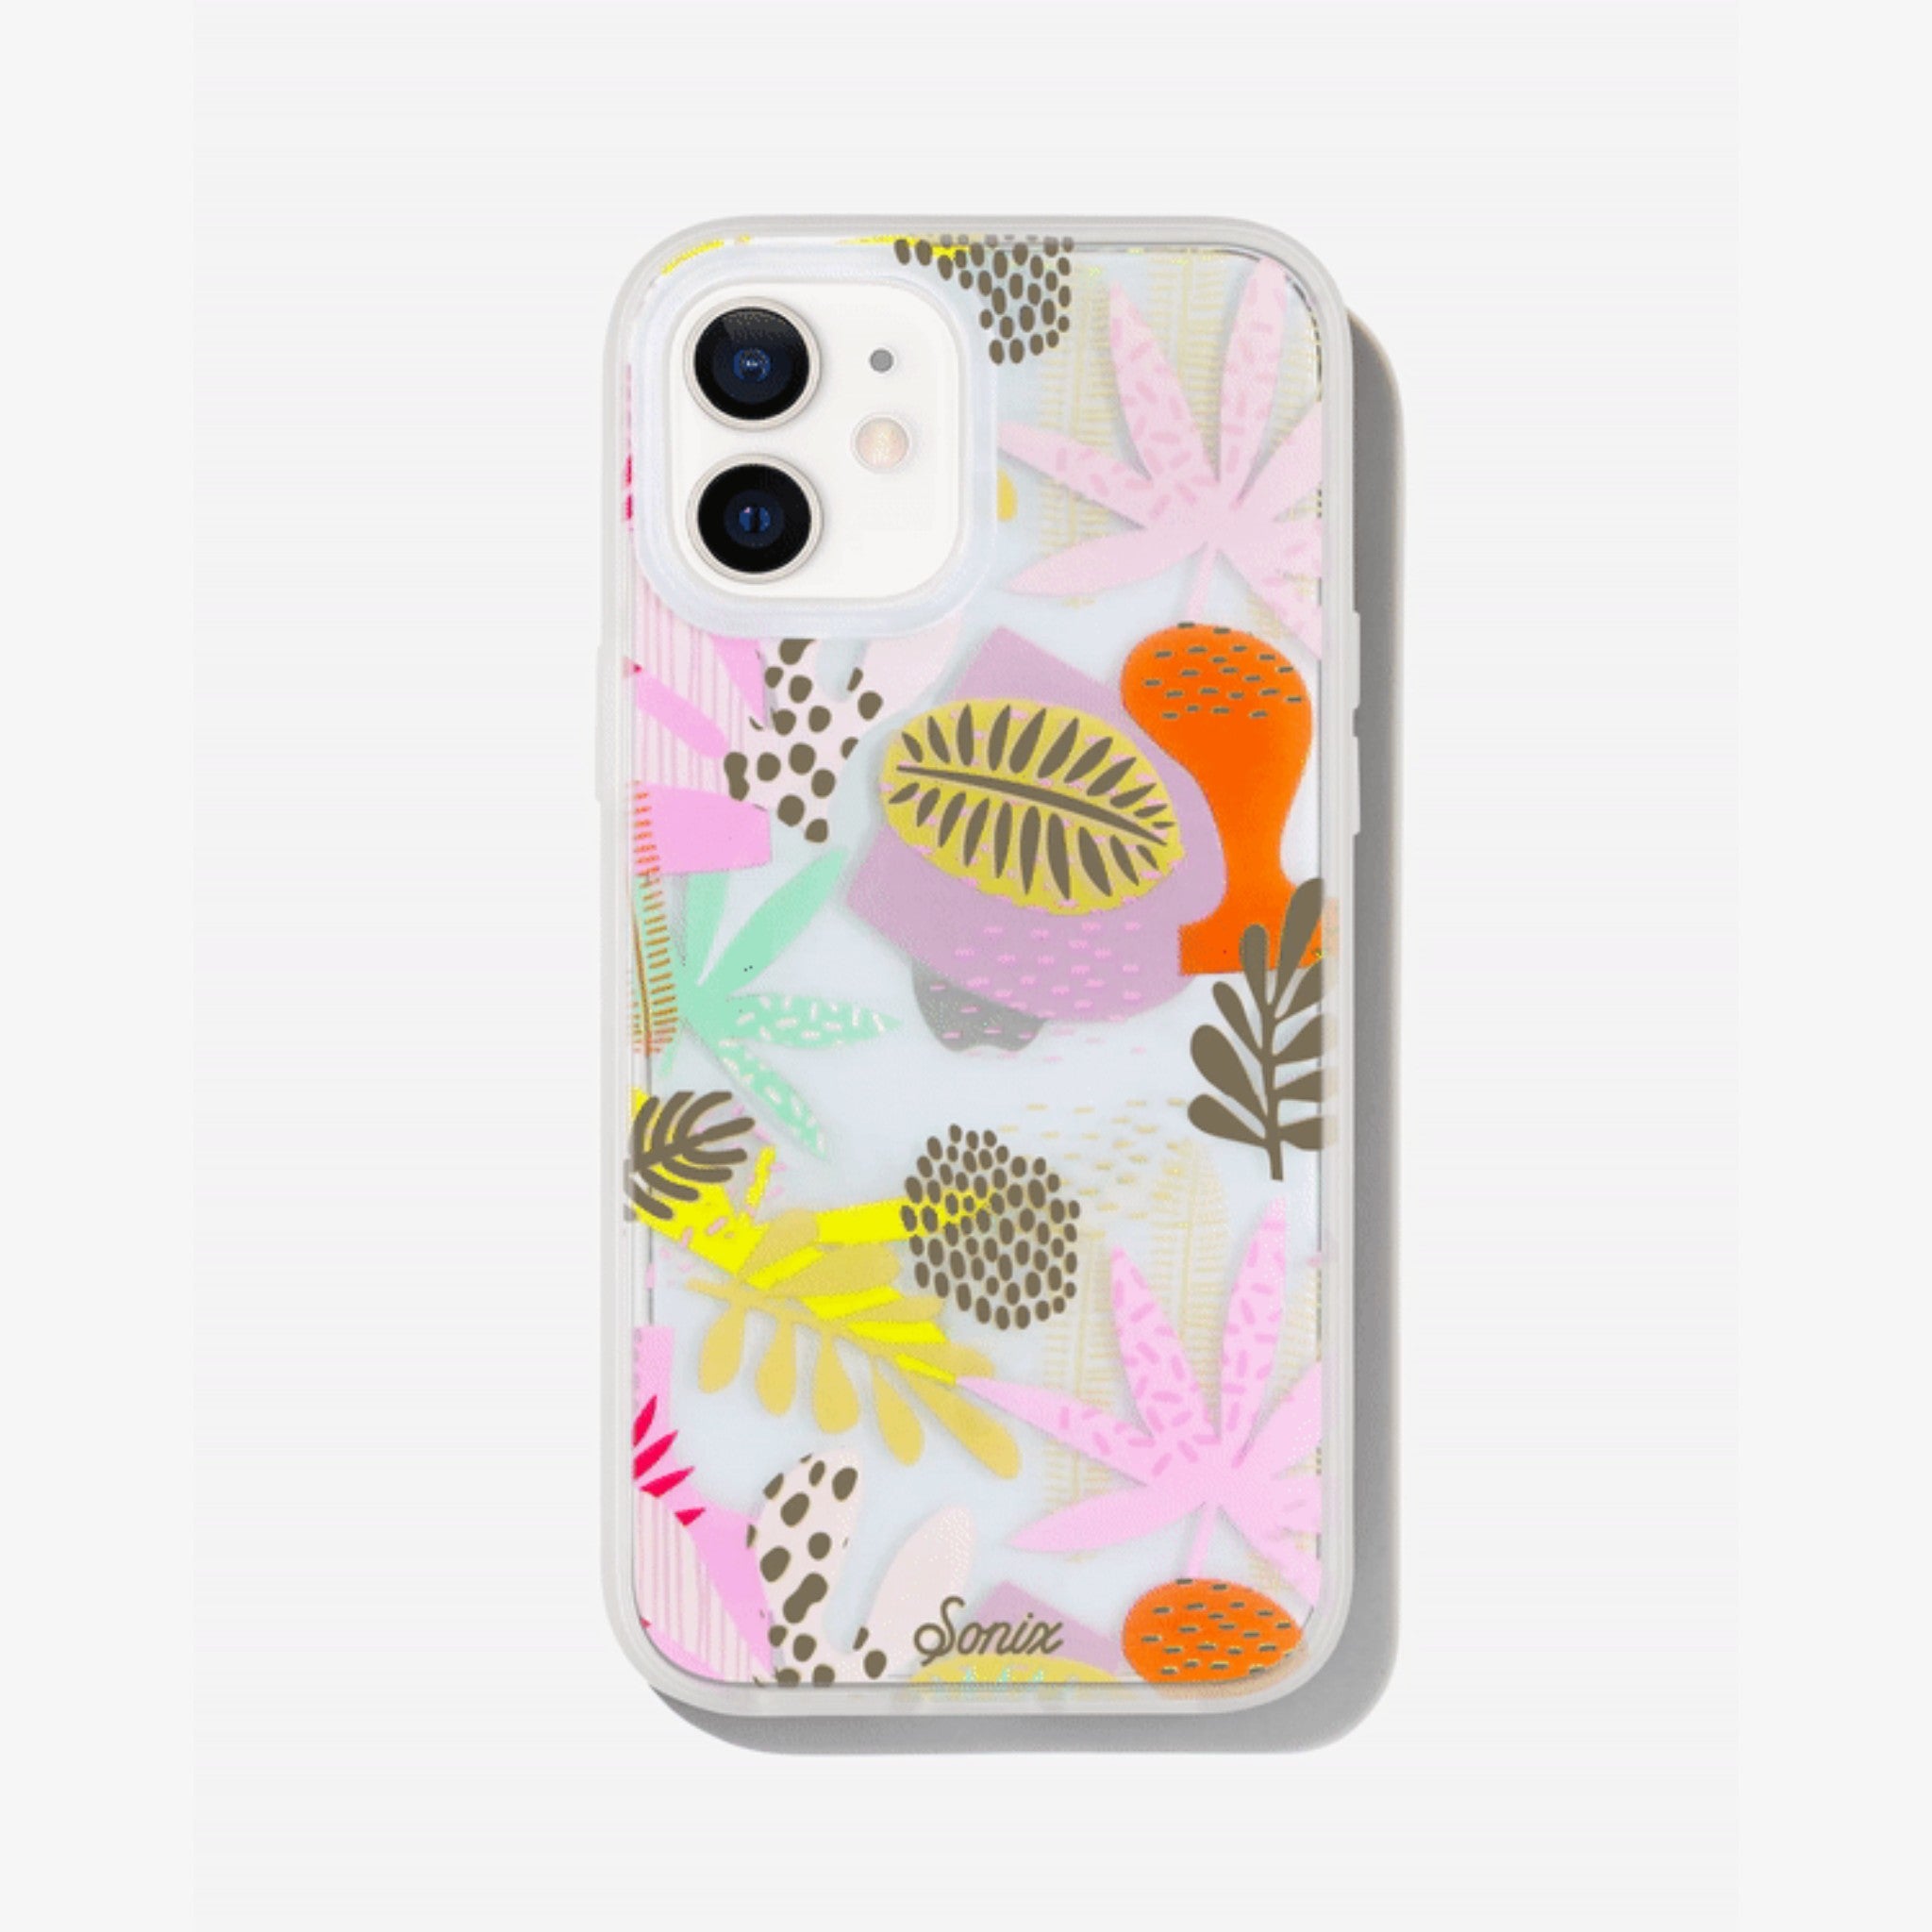 a collection of earthy shapes and forms, like plants and flowers to create a composition of playful abstract art with gold foil details shown on an iphone 12